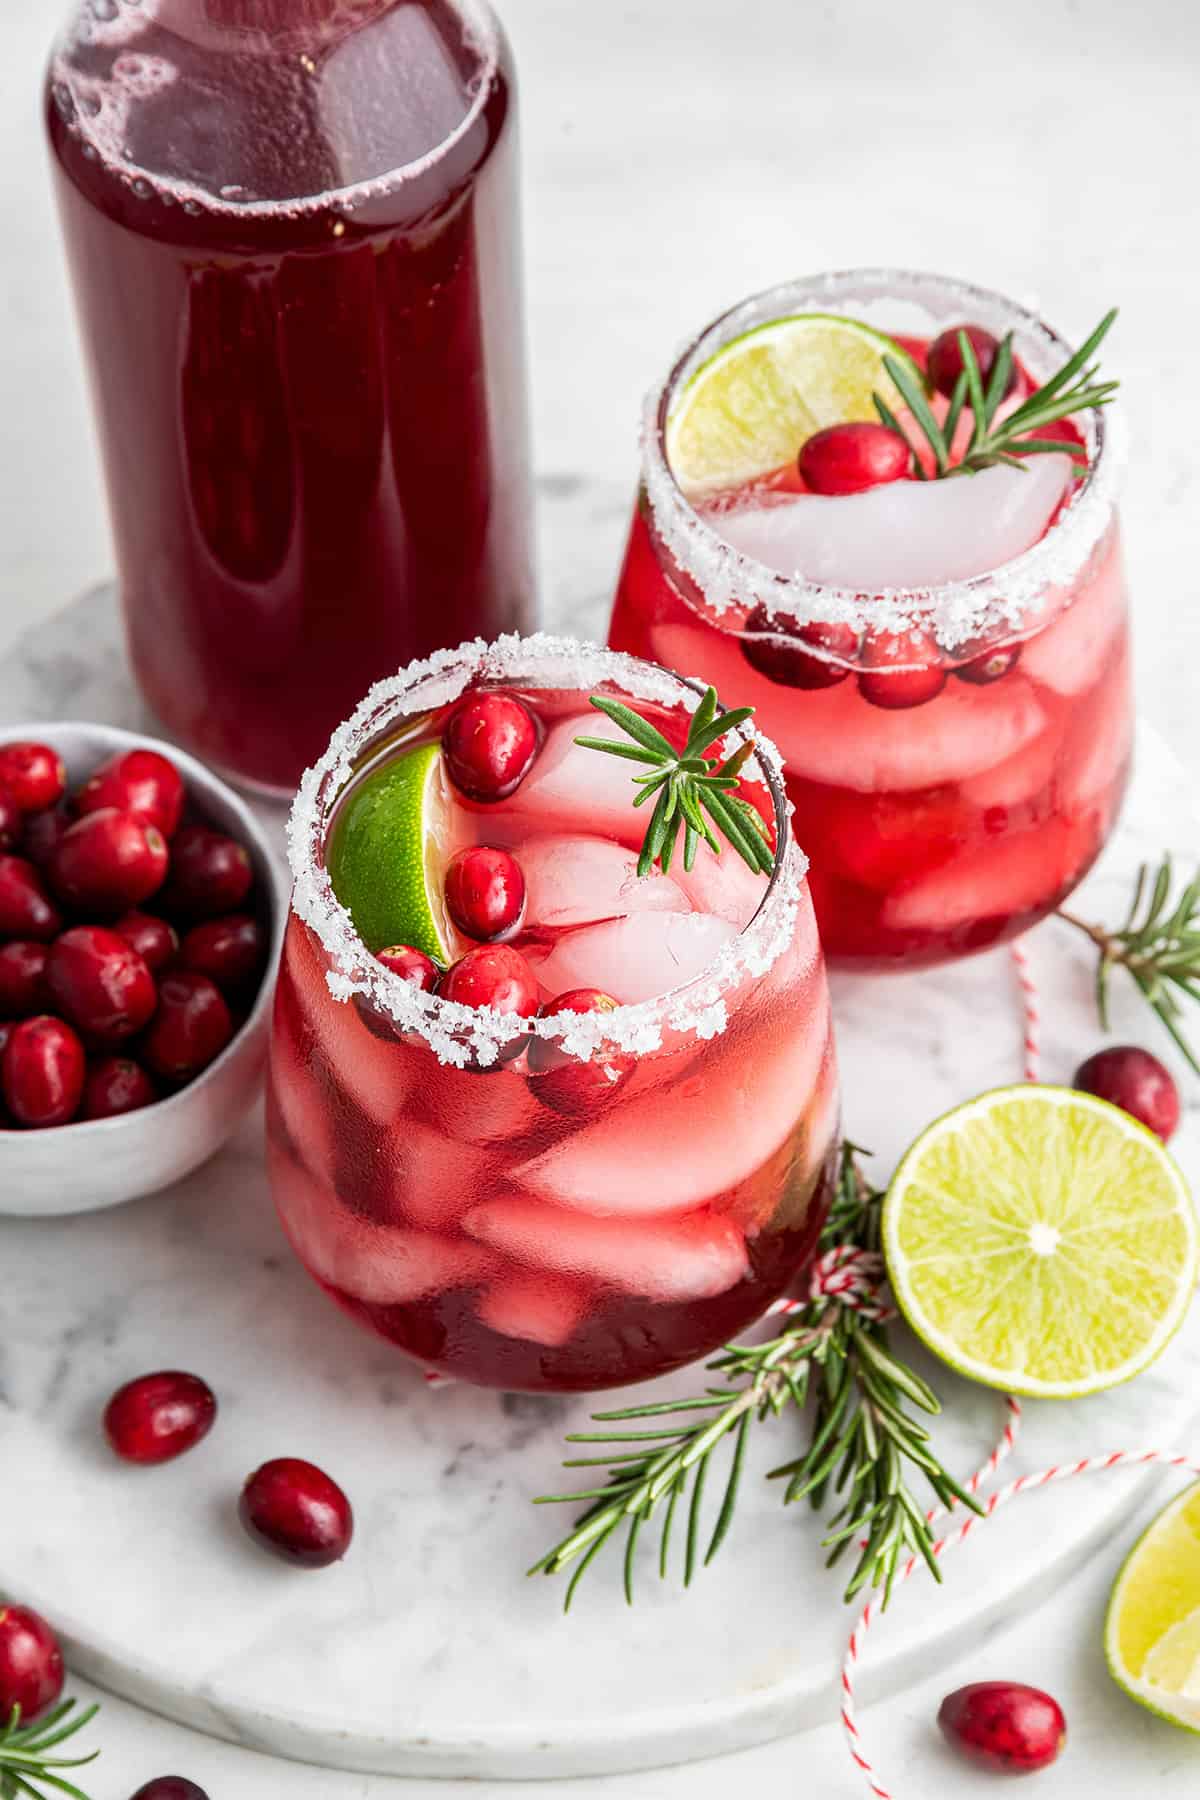 Two cranberry margaritas topped with fresh cranberries, lime wedges, and fresh rosemary, next to a bowl of cranberries, a bottle of cranberry juice, some sprigs of rosemary, and some lime halves